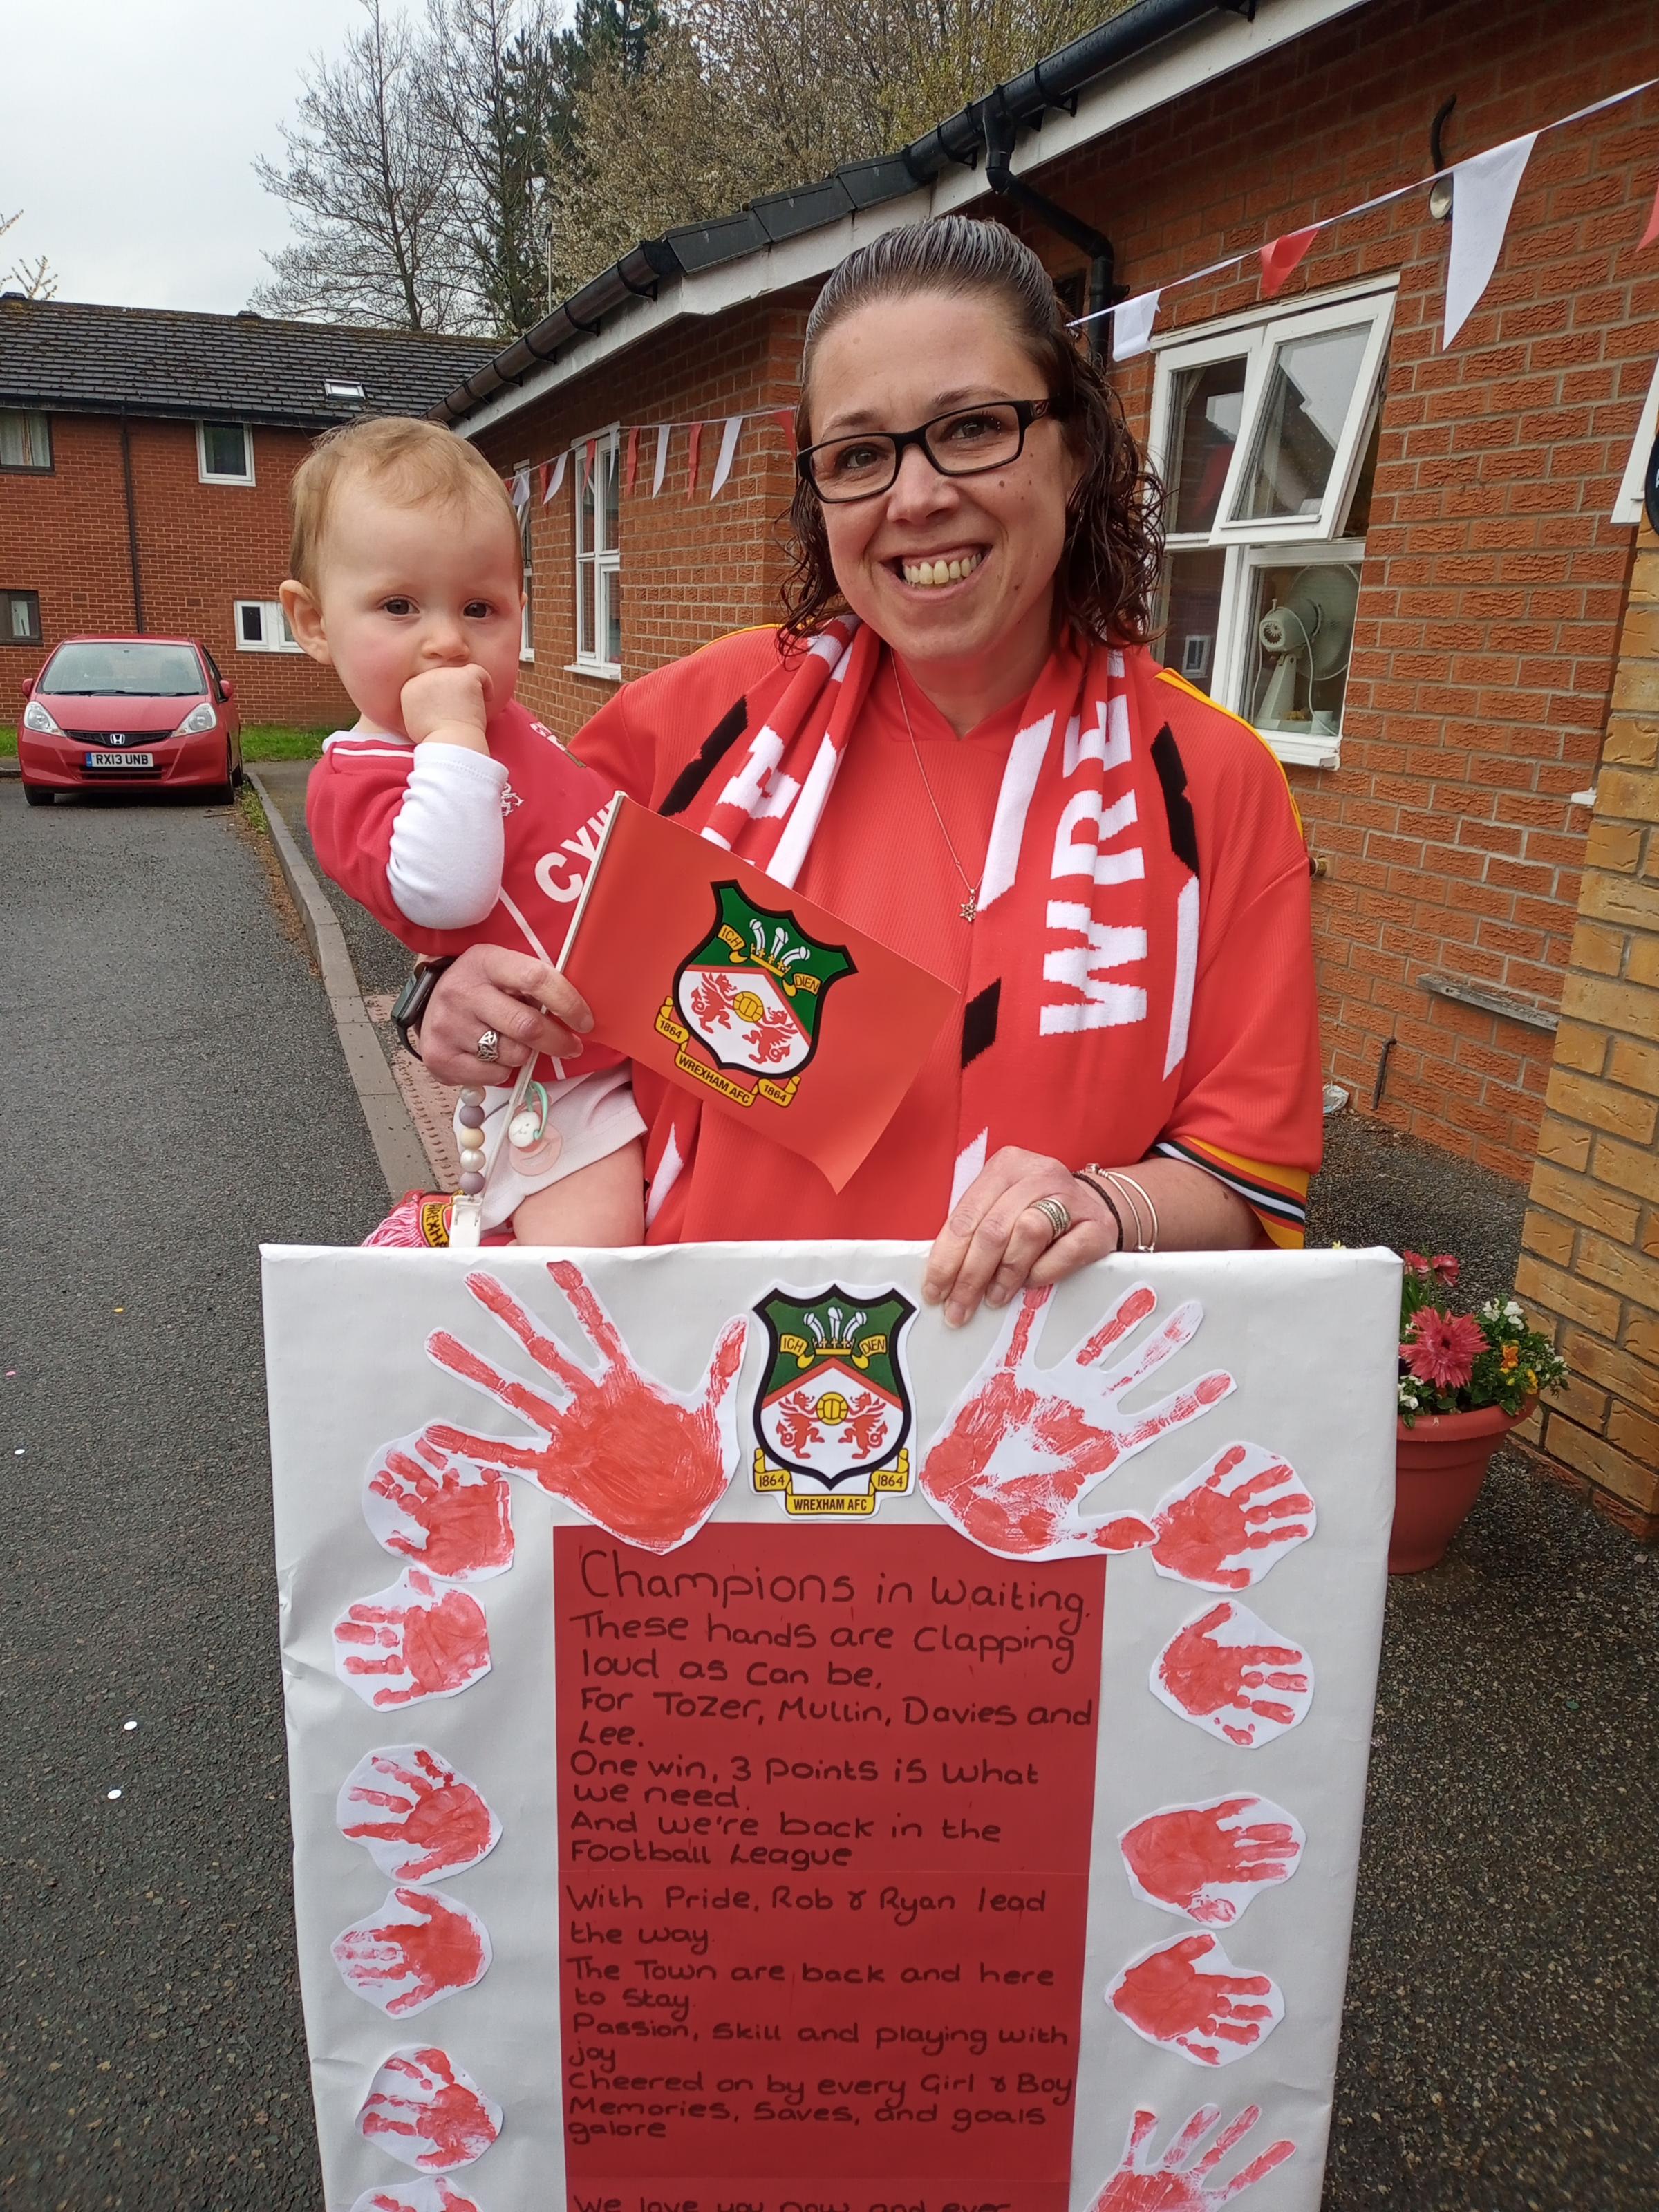 Support for Wrexham AFC from all at Peter Pan Nursery in Wrexham.